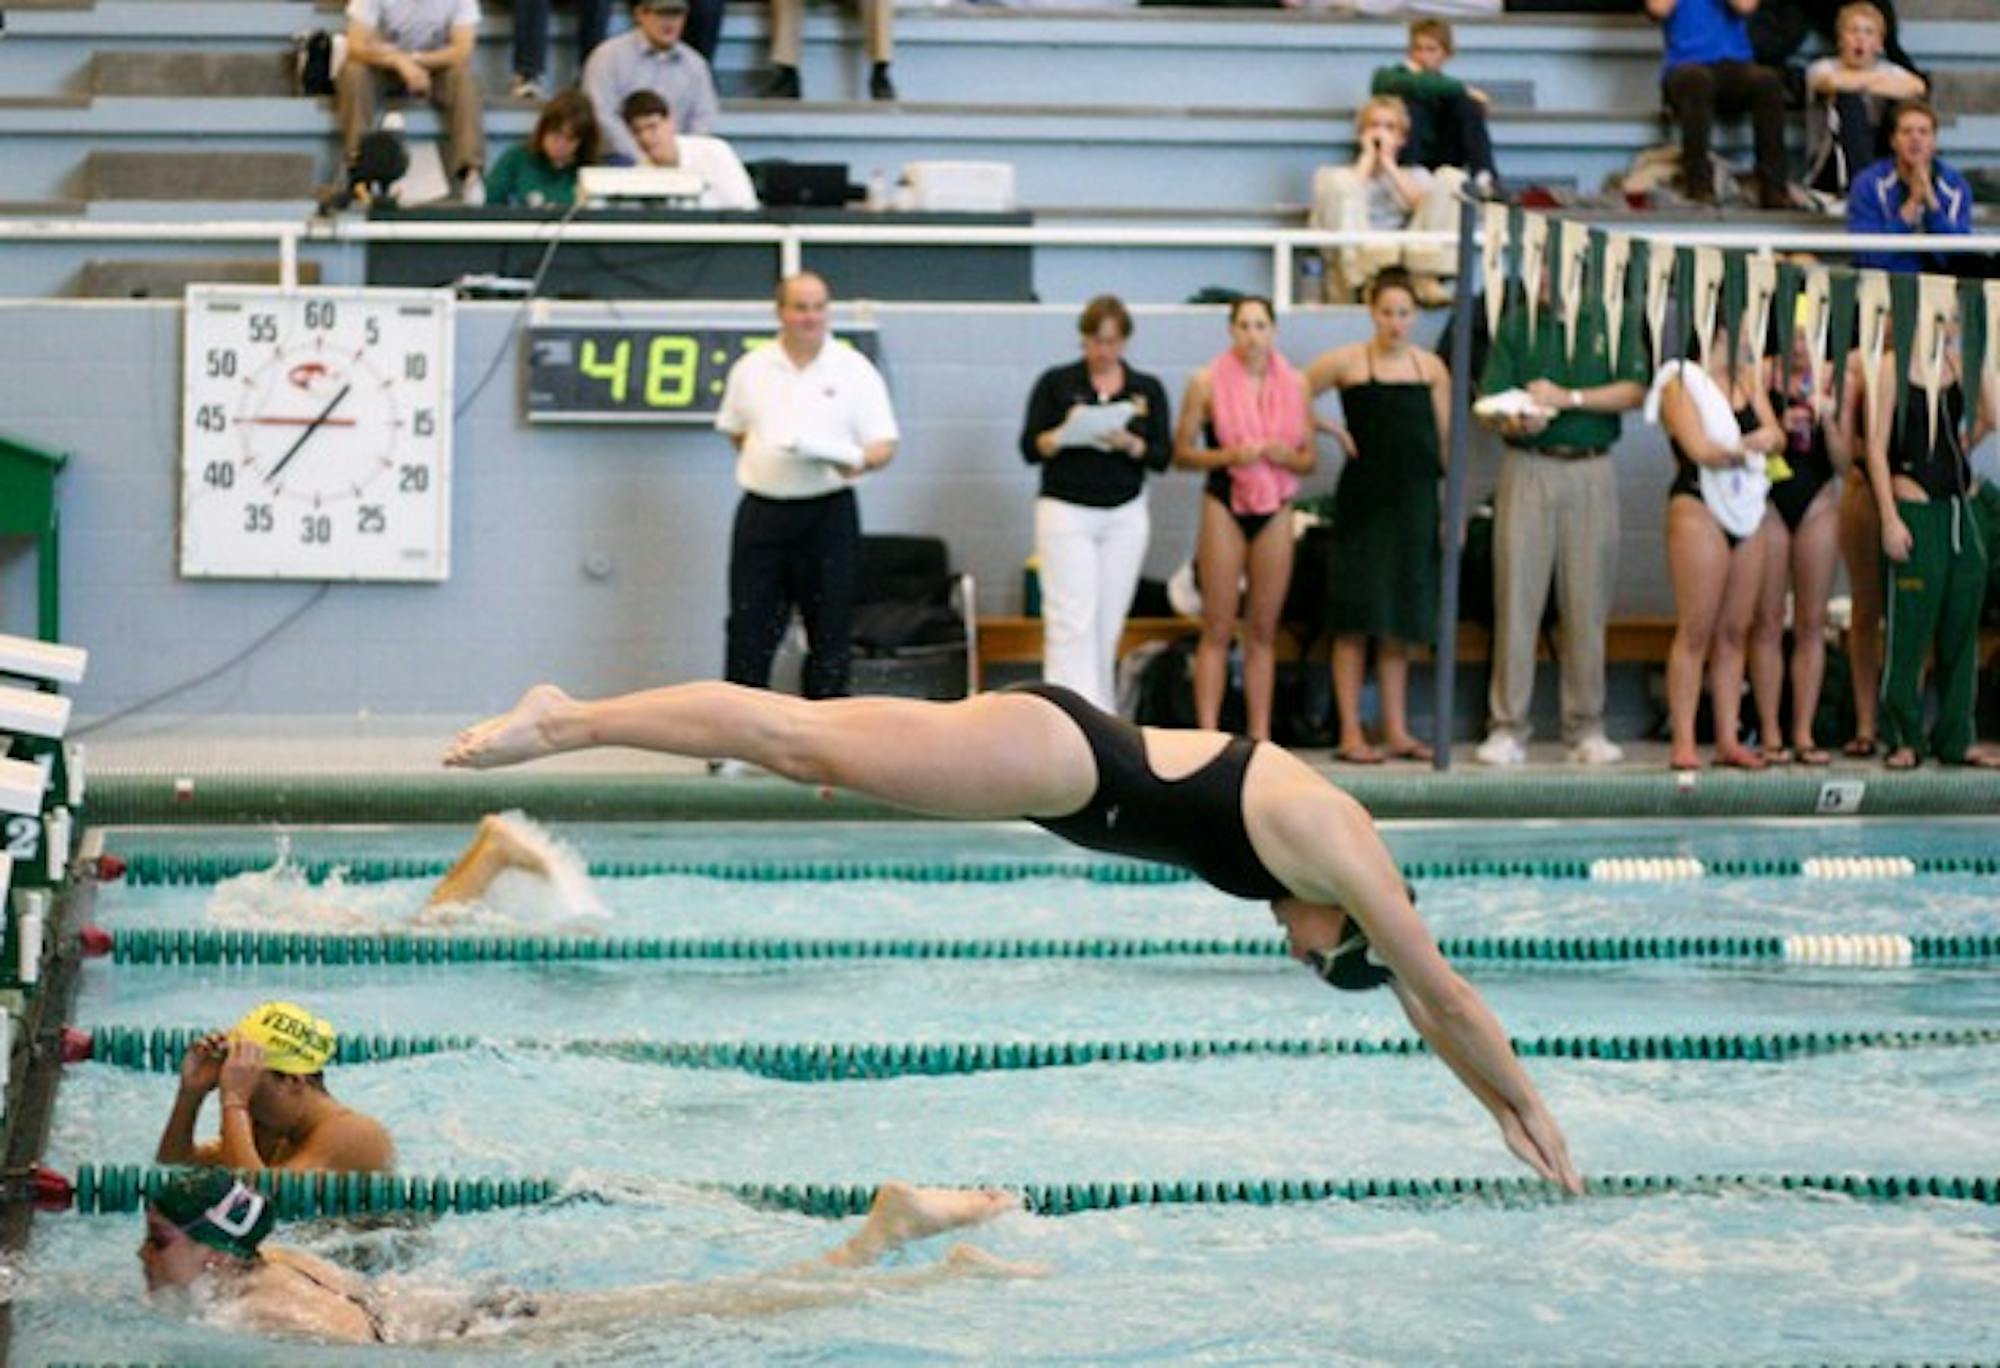 The Big Green women's swimming and diving team defeated Vermont 168-132 in Hanover this weekend.